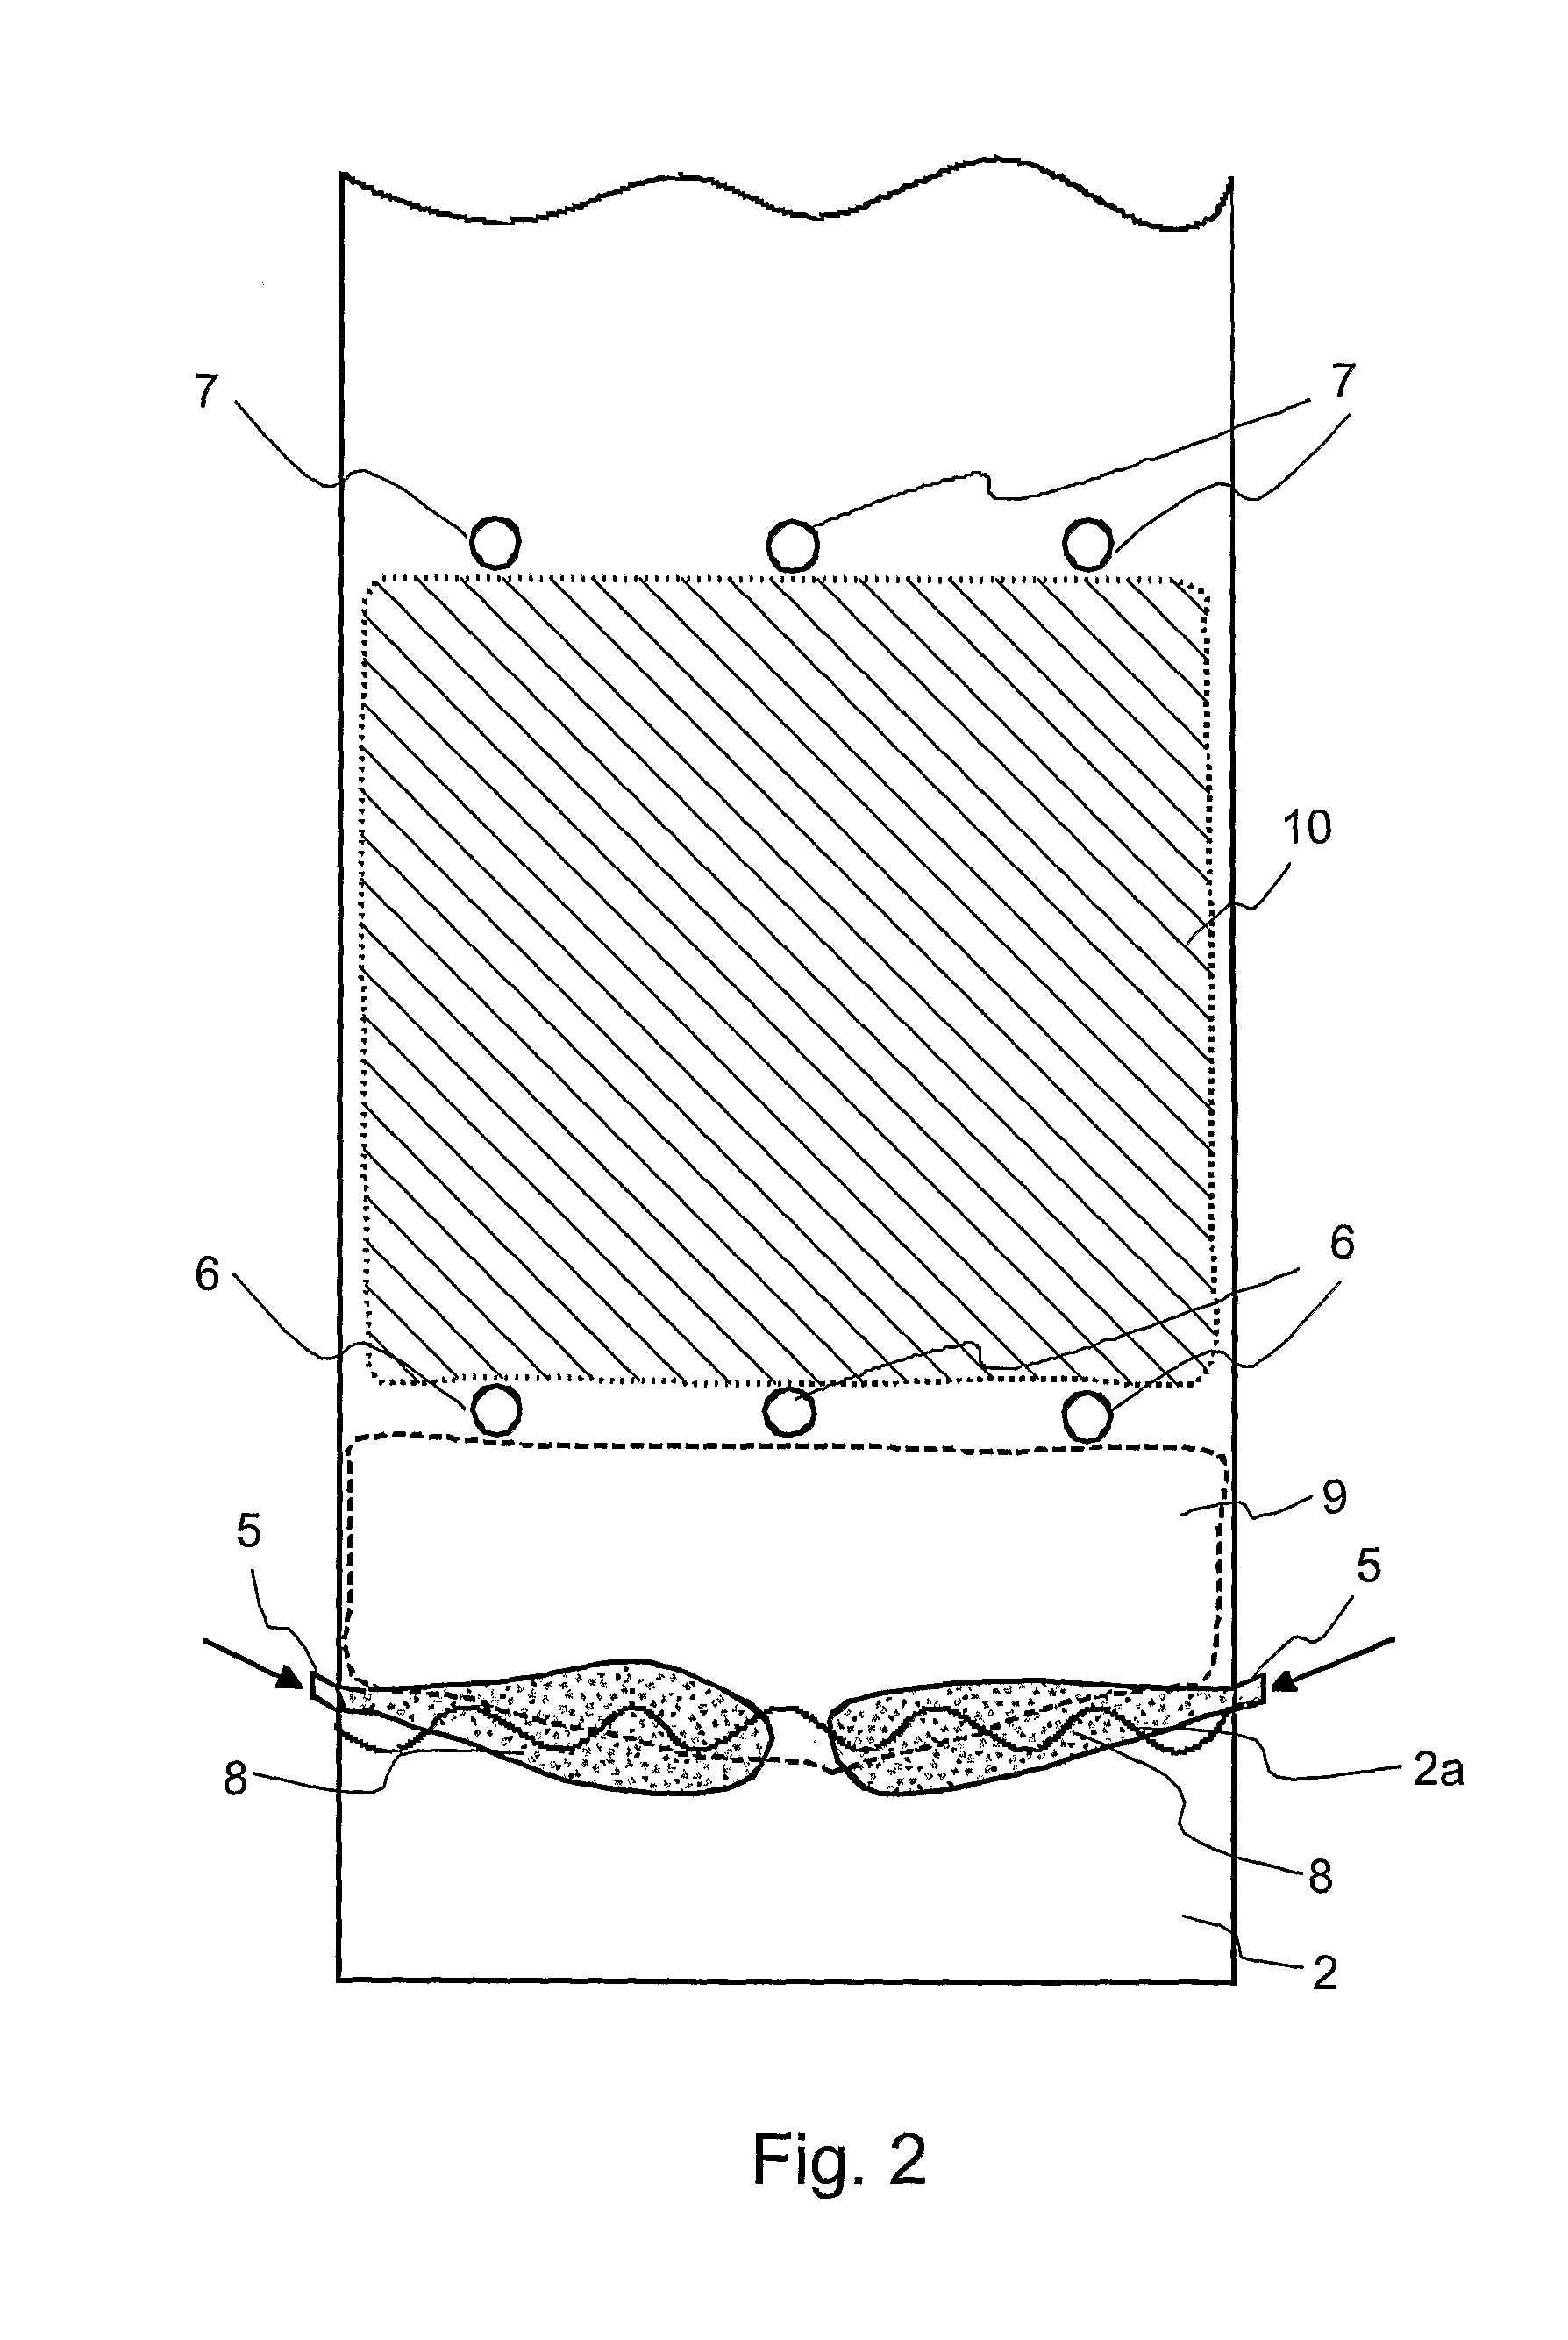 Method For Reducing Nitrogen Oxide Emissions of a Bubbling Fluidized Bed Boiler and an Air Distribution System of a Bubbling Fluidized Bed Boiler